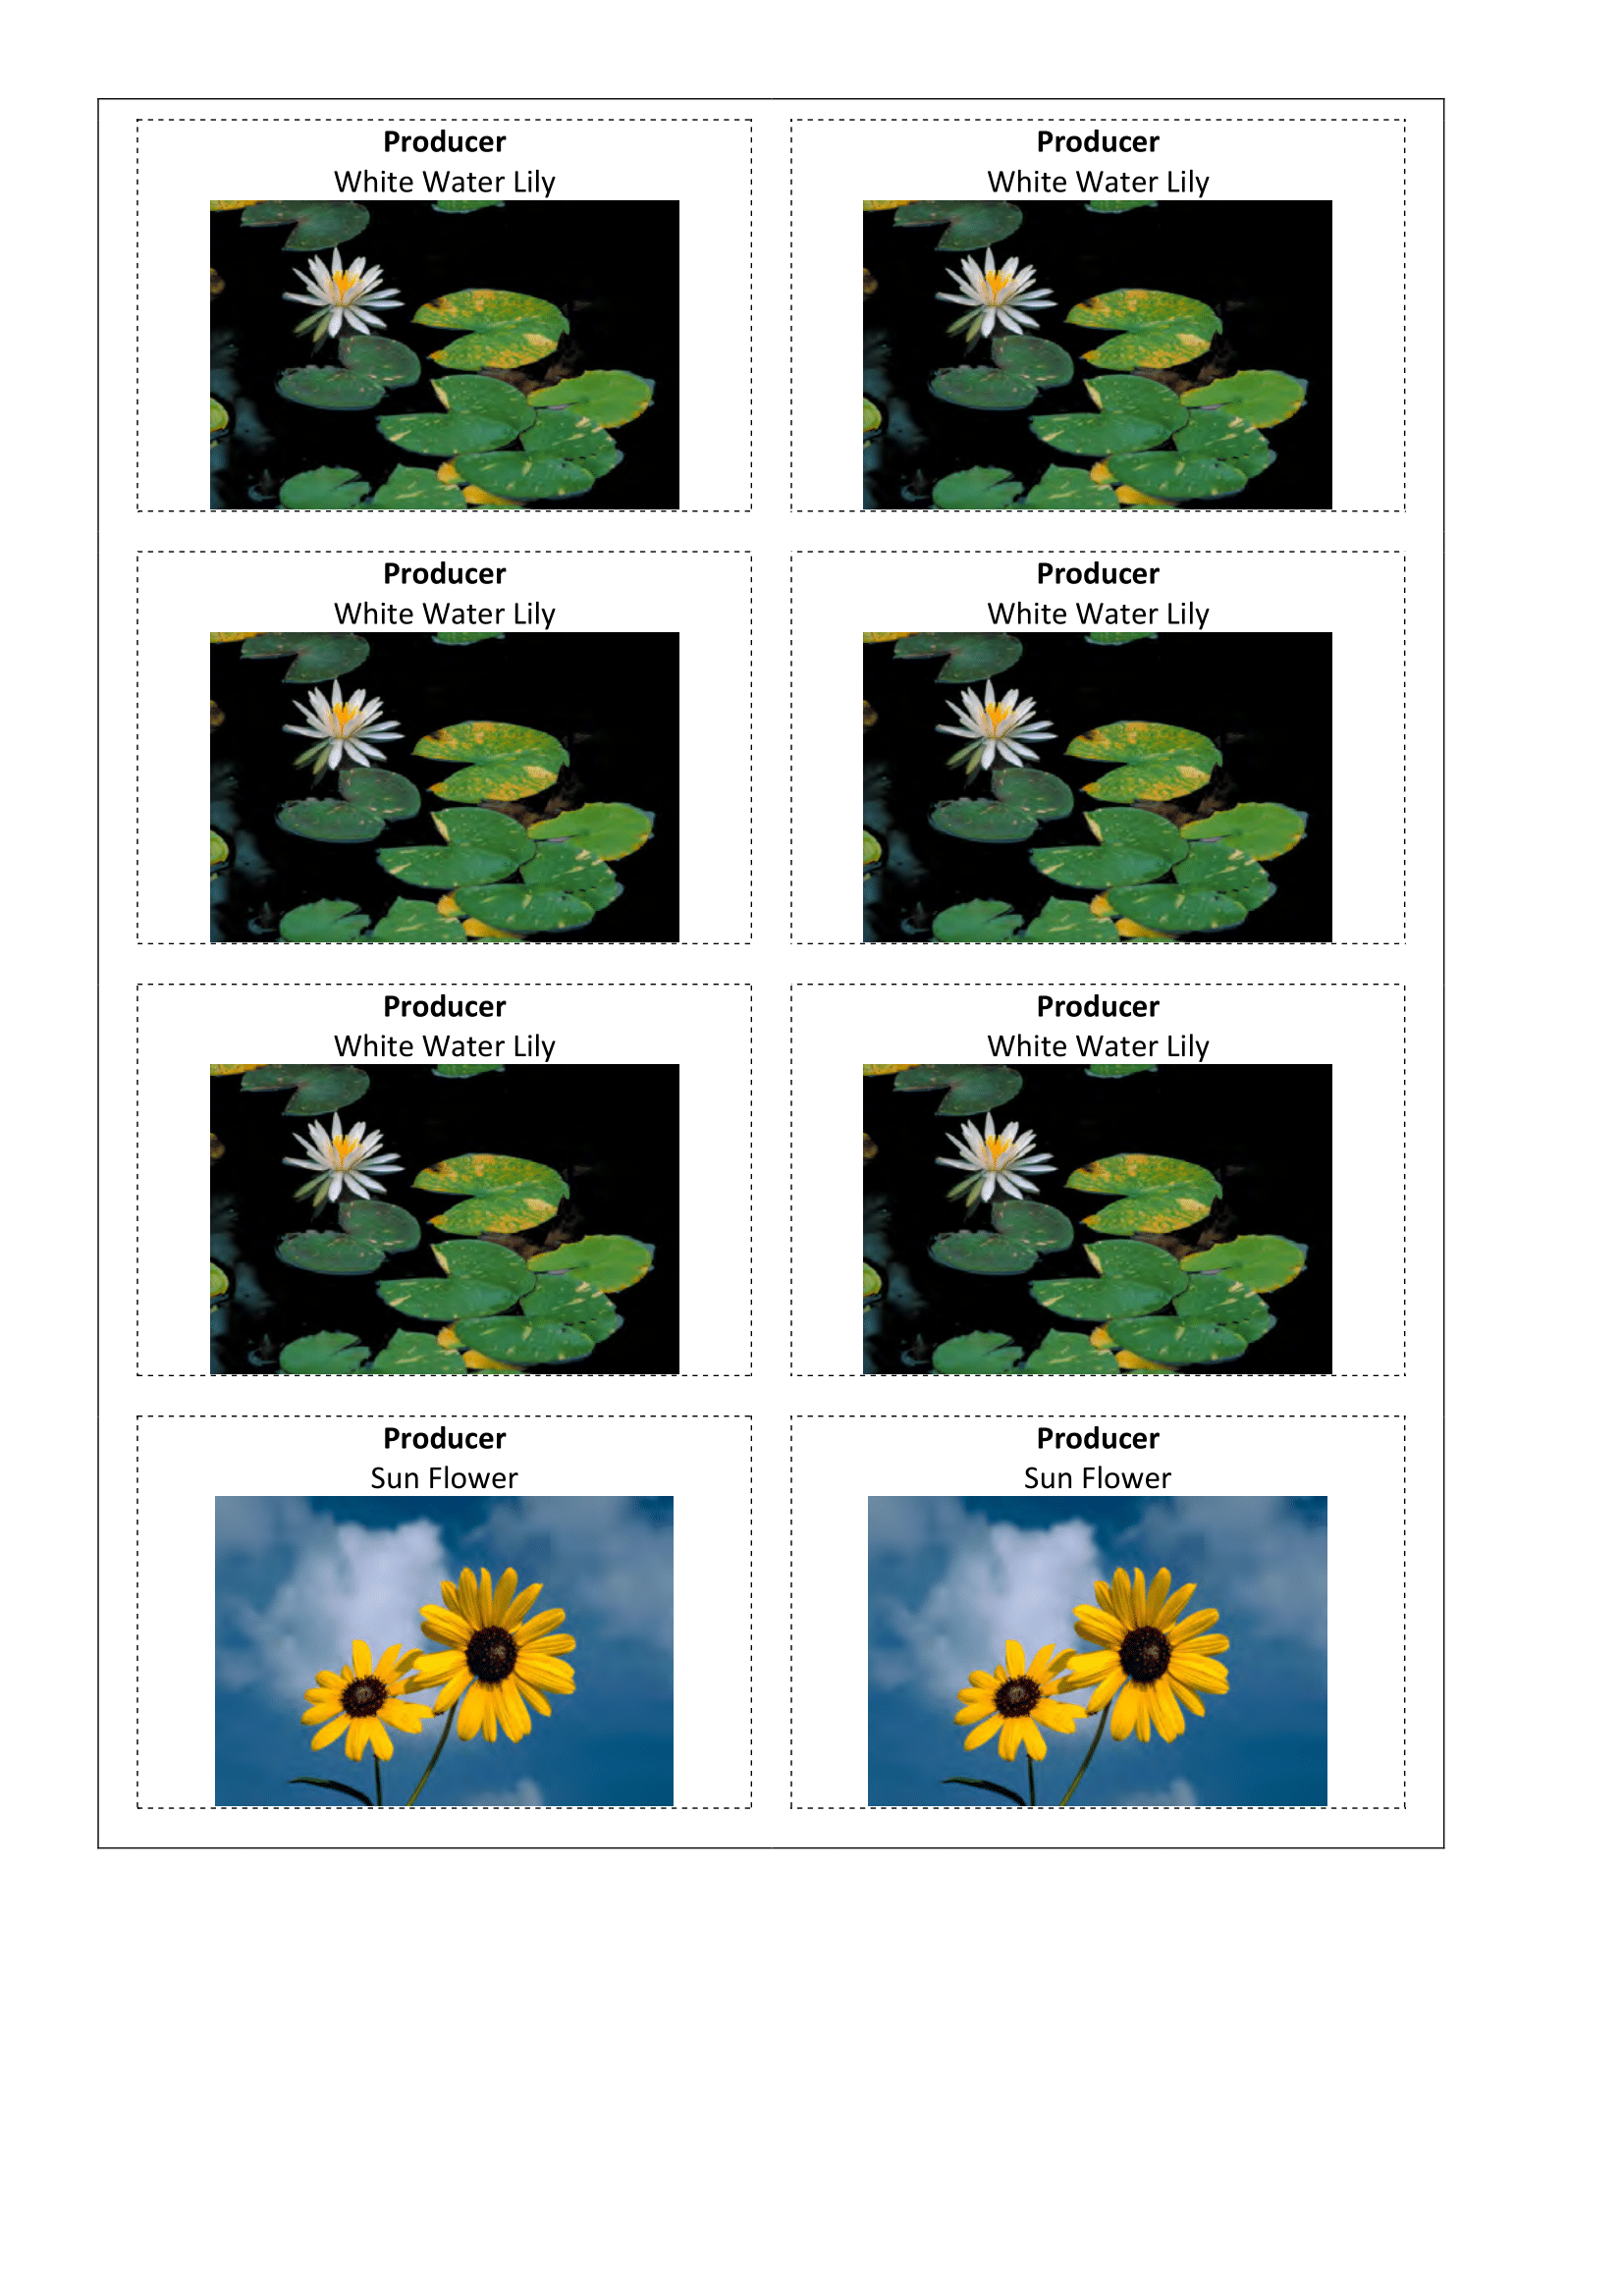 Images, Primary Consumer white water lily and sun flower.